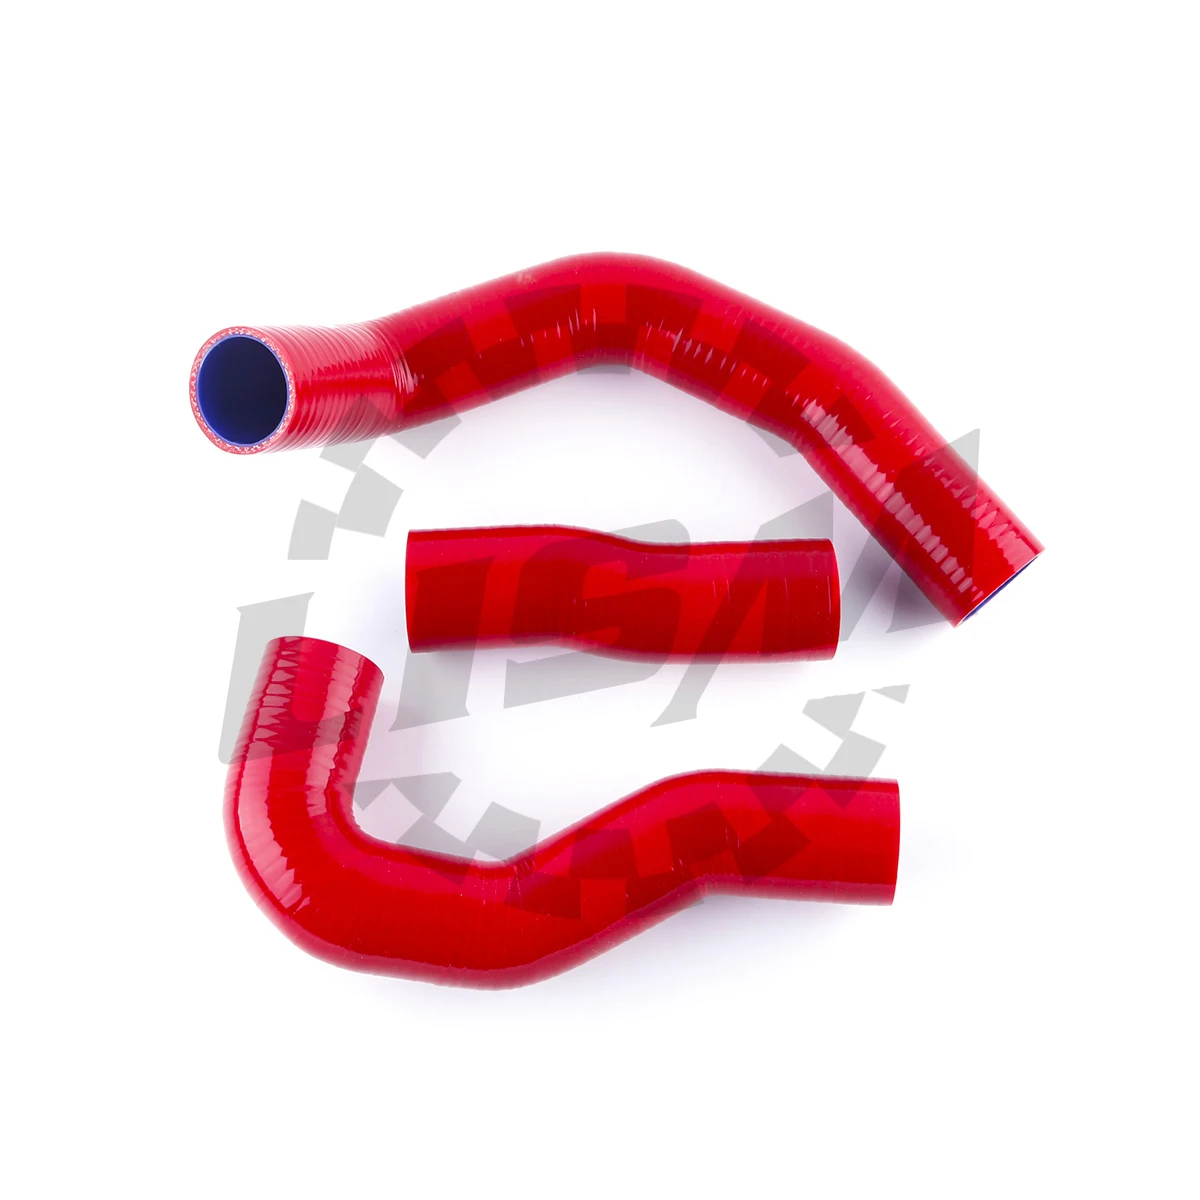 

3pcs For 2001-2007 Mitsubishi L200 2.5 TD 4WD 2002 2003 2004 2005 2006 3-ply Intercooler Turbo Boost Silicone Hose